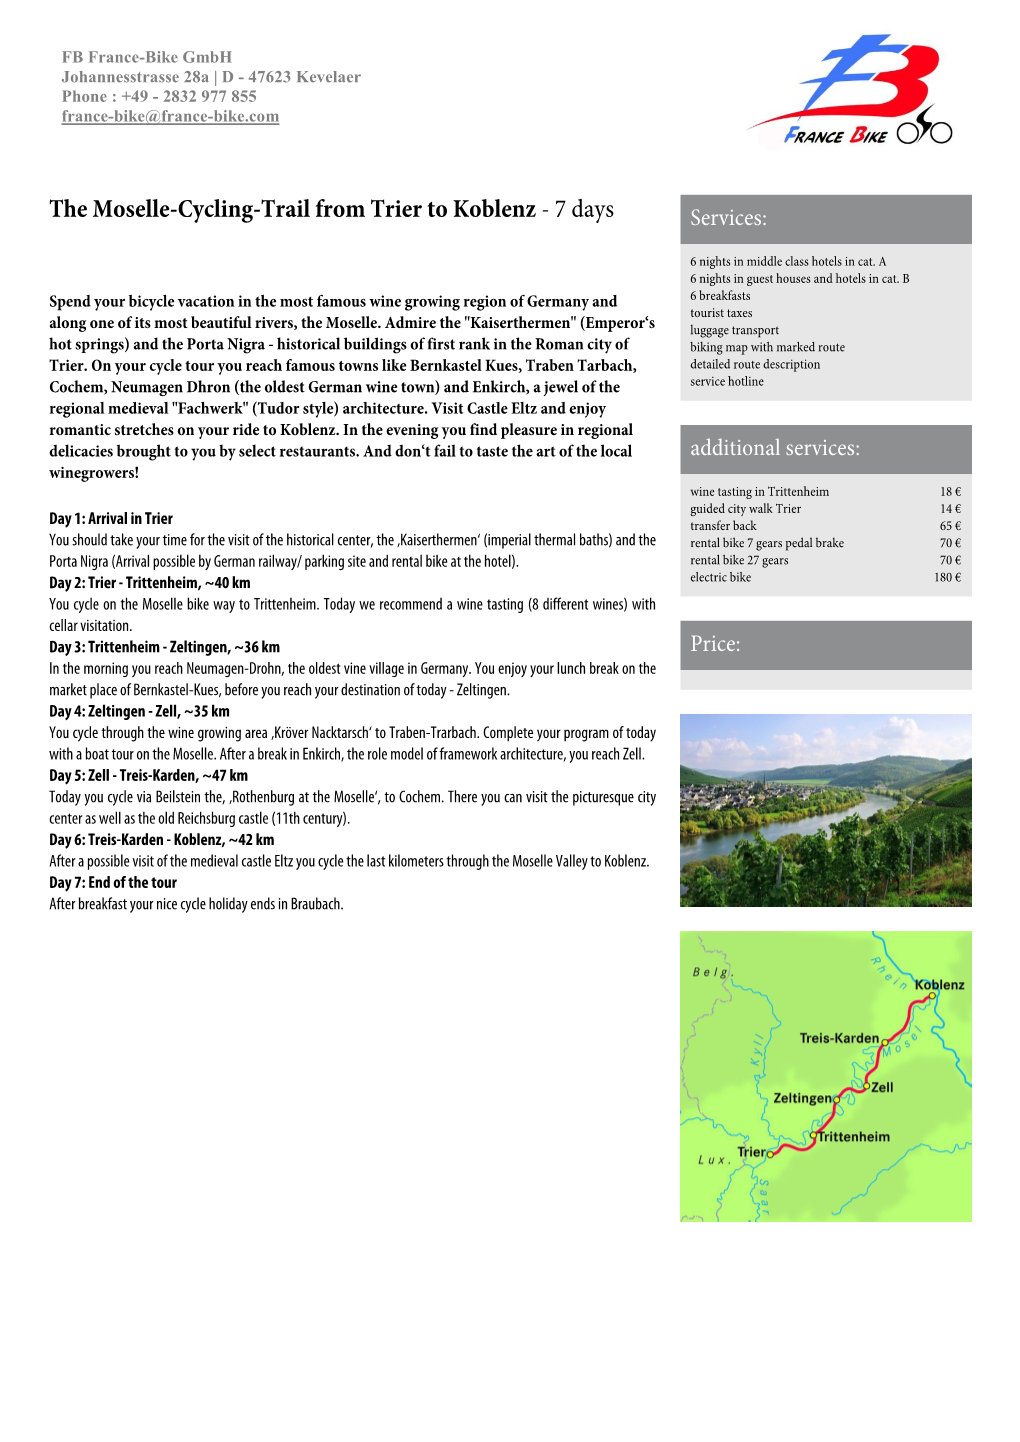 The Moselle-Cycling-Trail from Trier to Koblenz - 7 Days Services